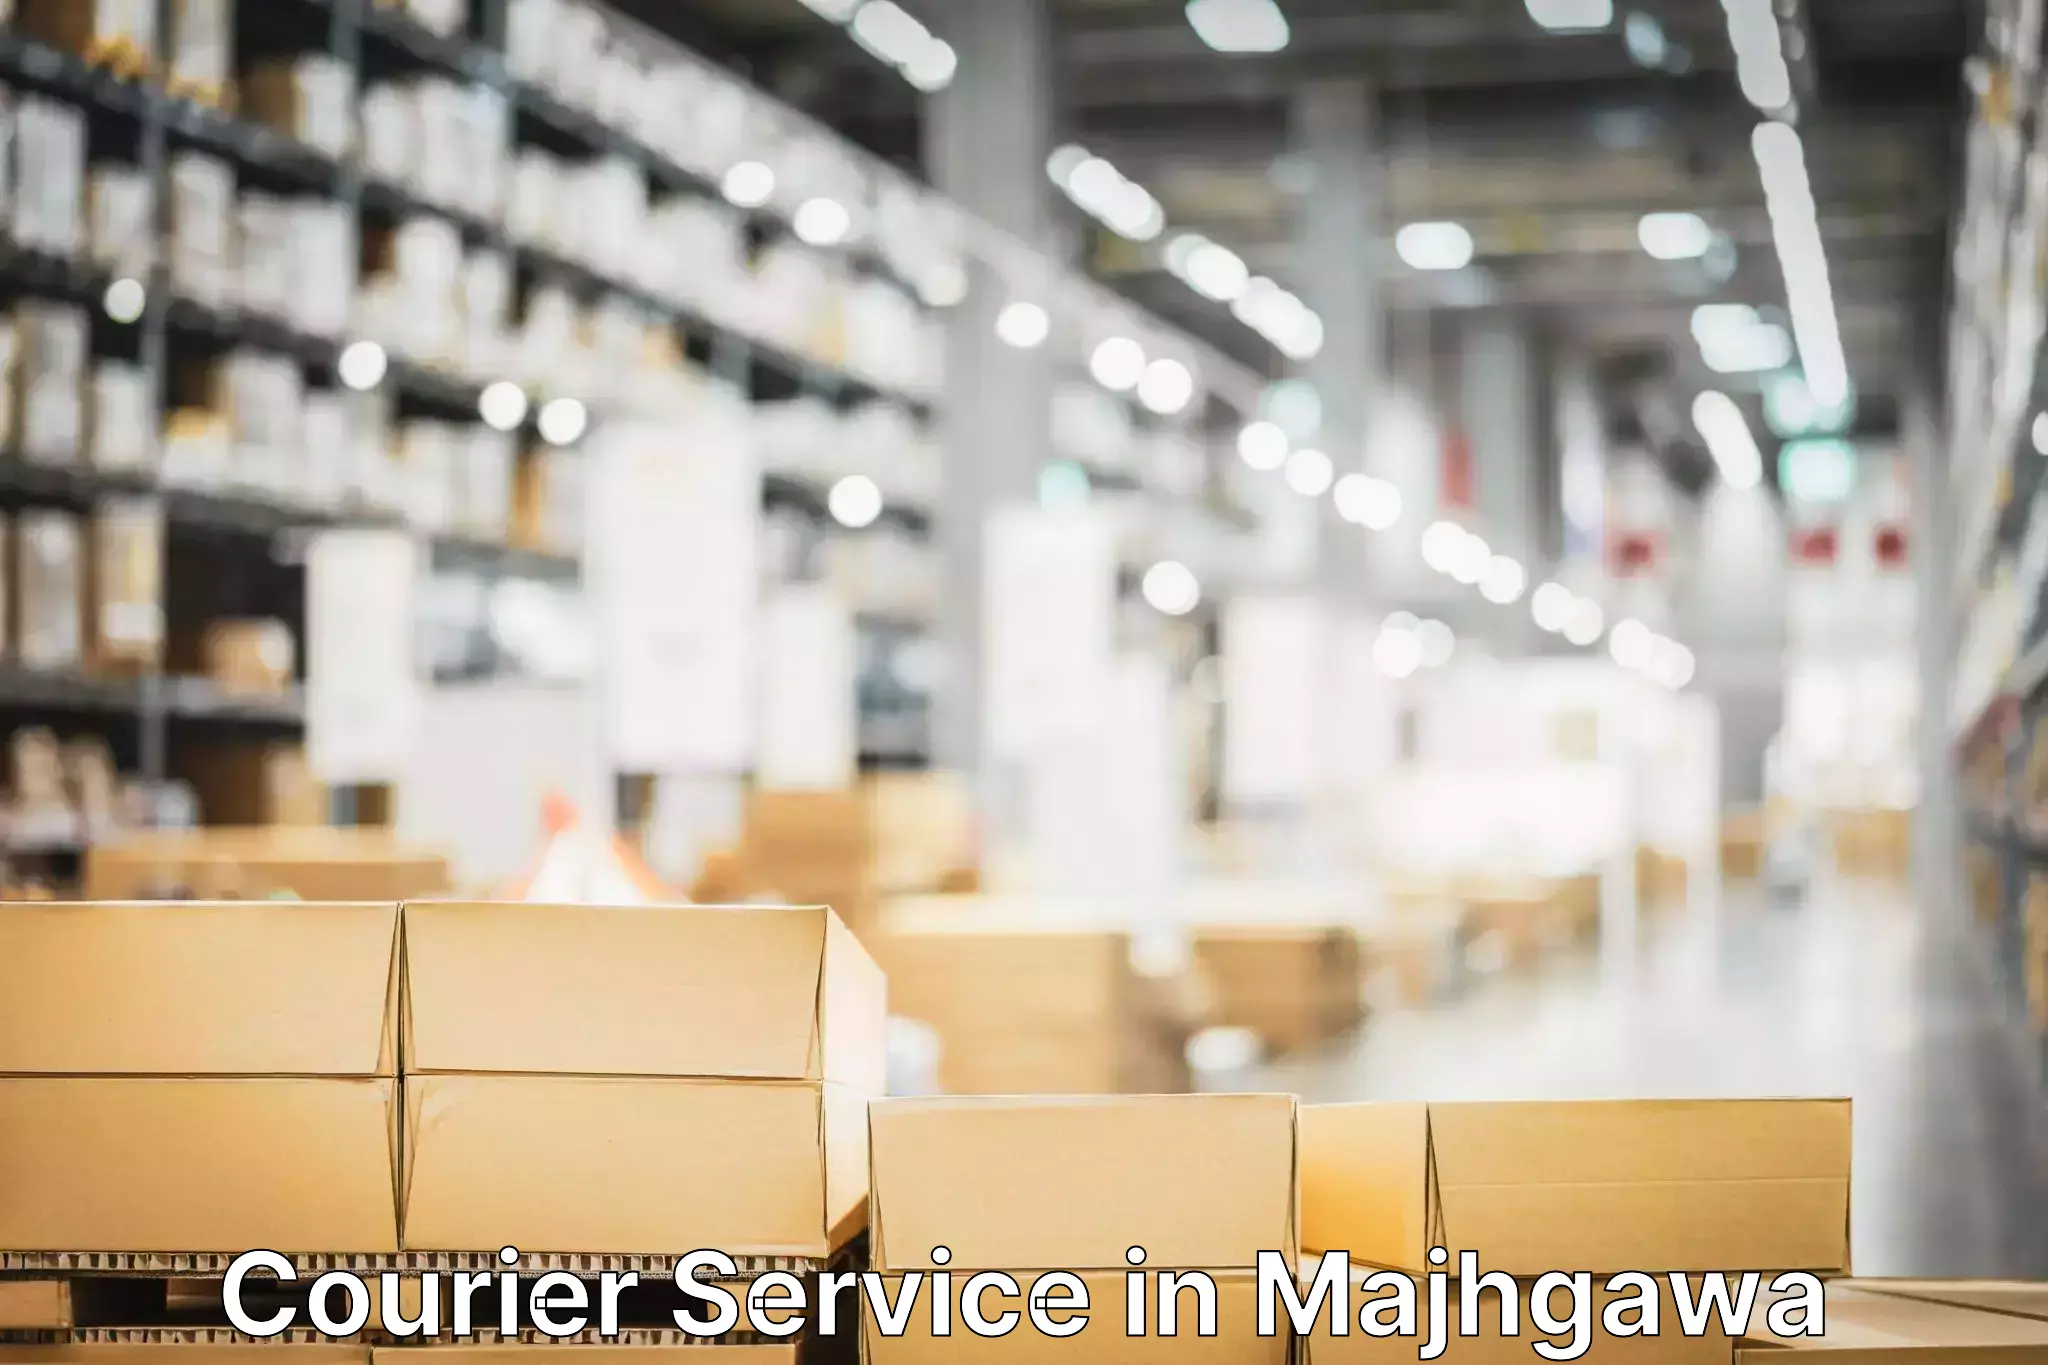 Secure package delivery in Majhgawa